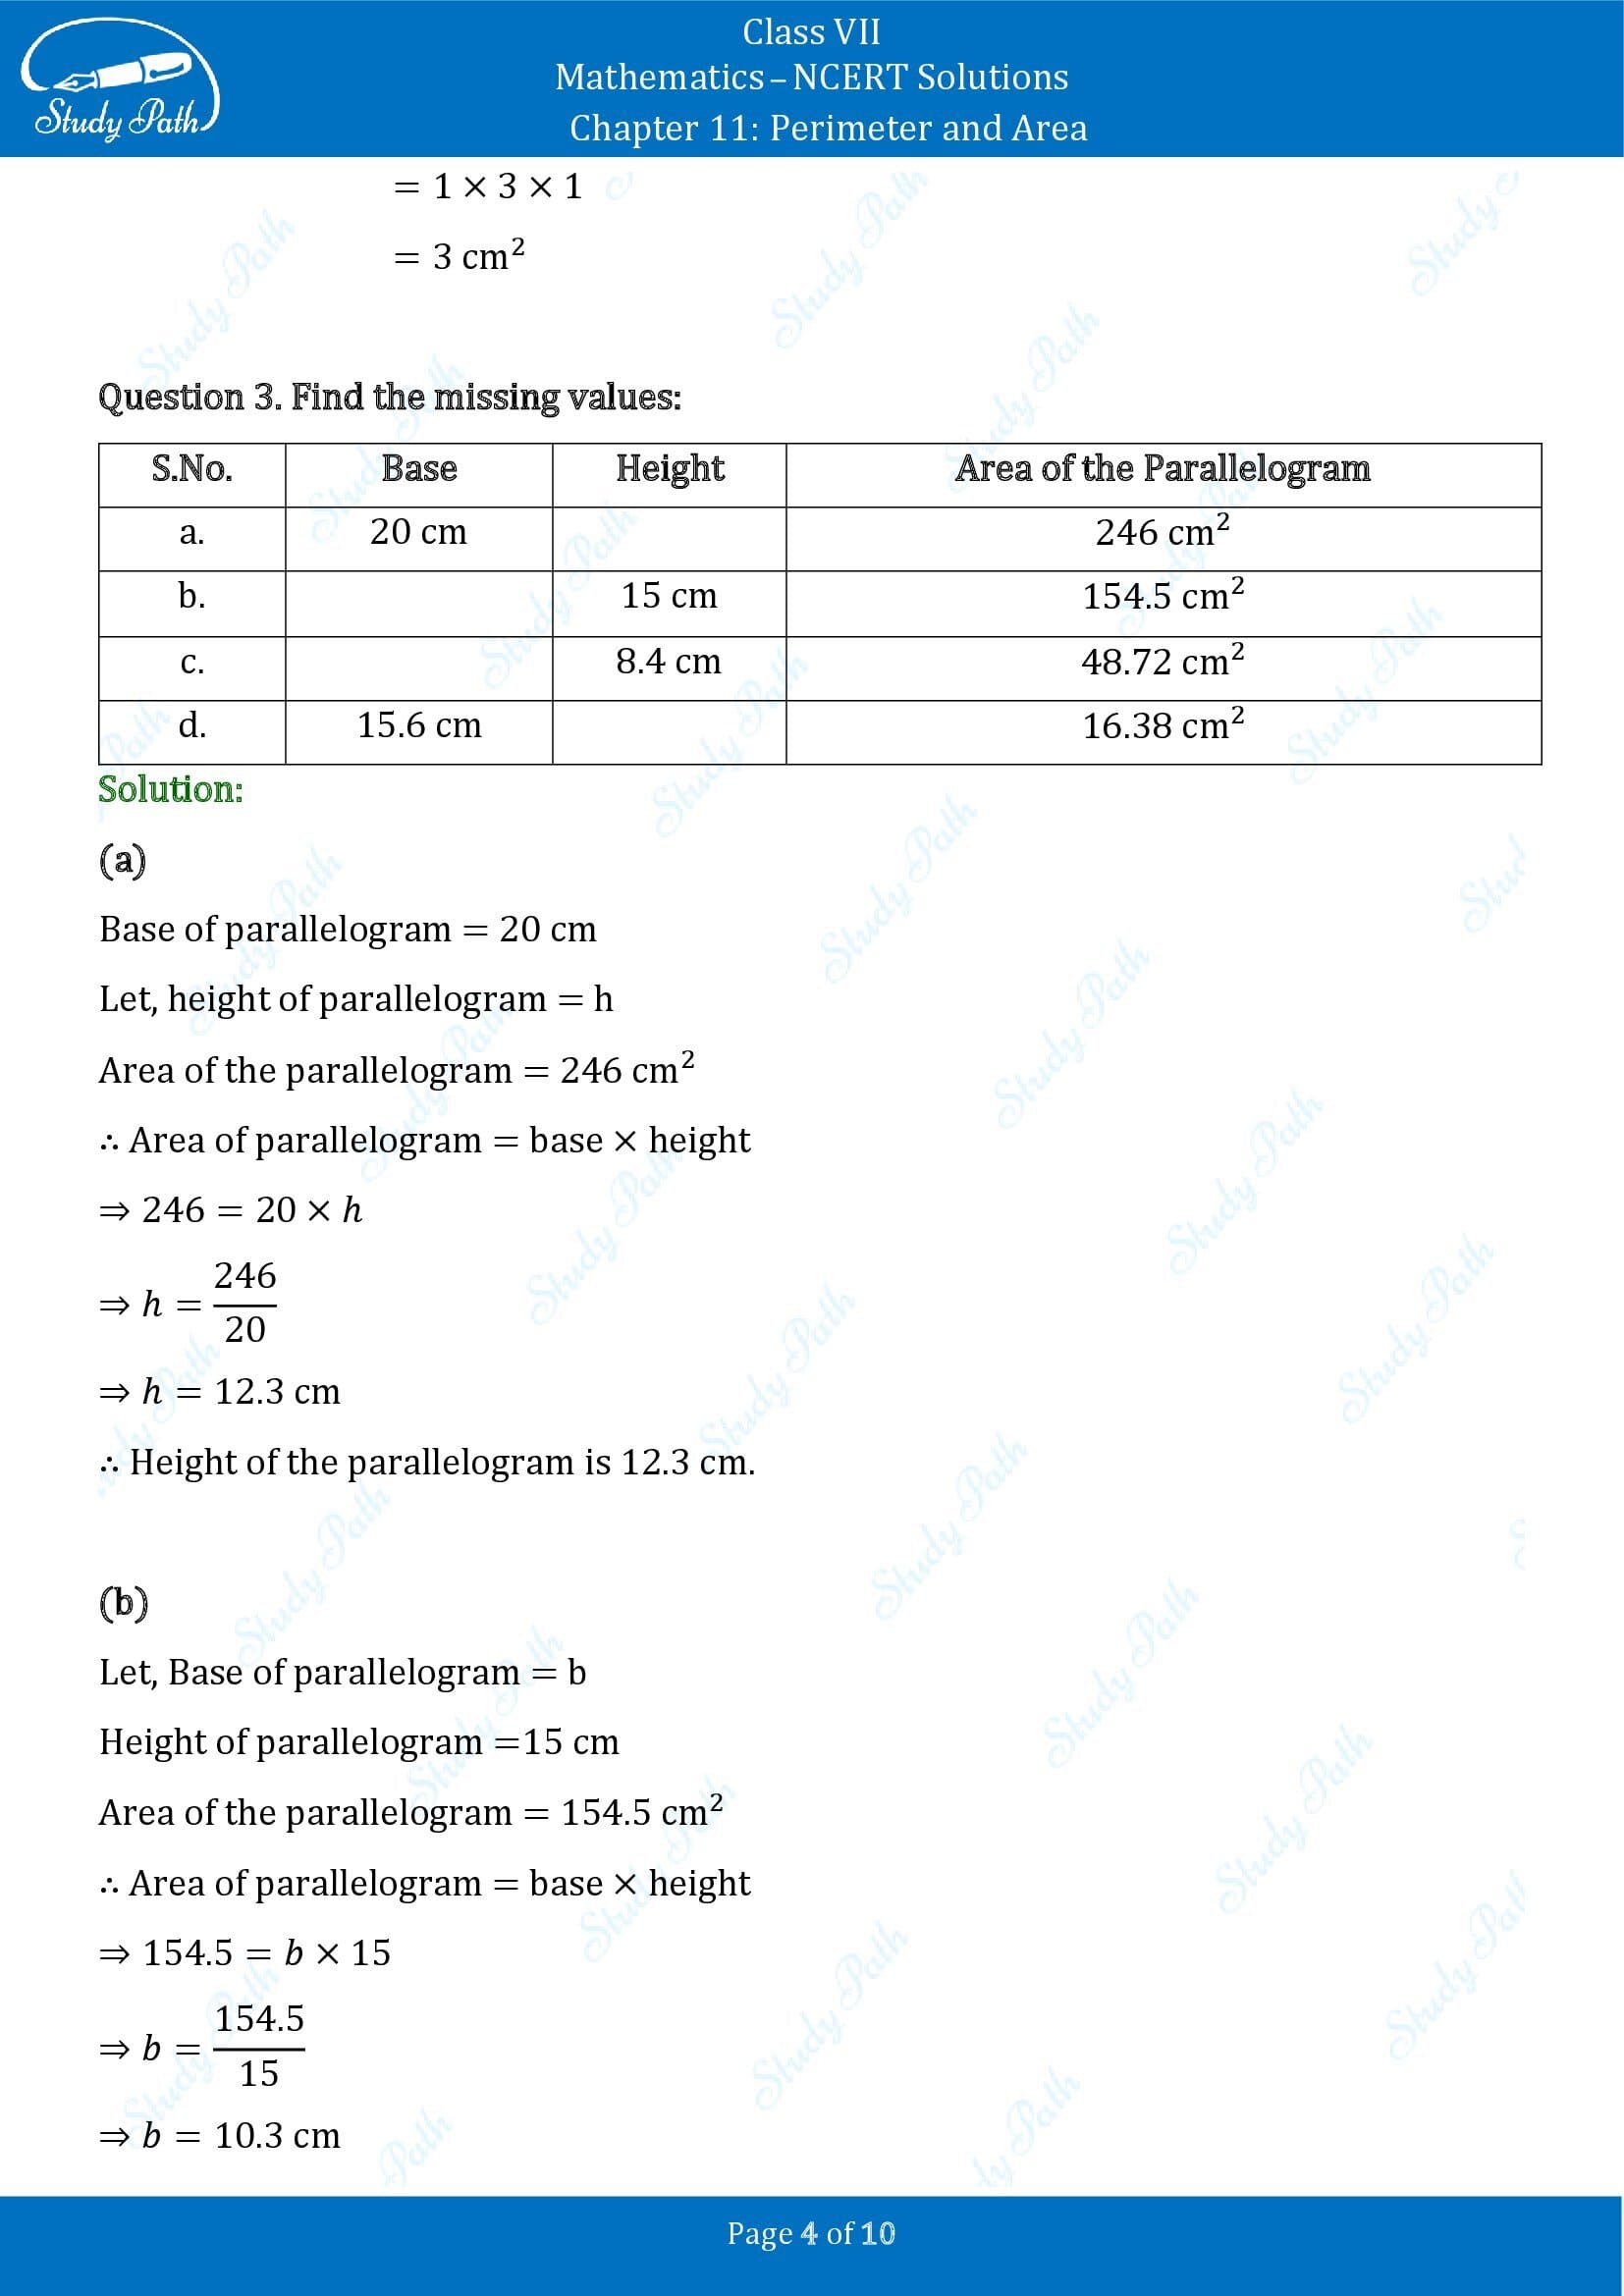 NCERT Solutions for Class 7 Maths Chapter 11 Perimeter and Area Exercise 11.2 00004